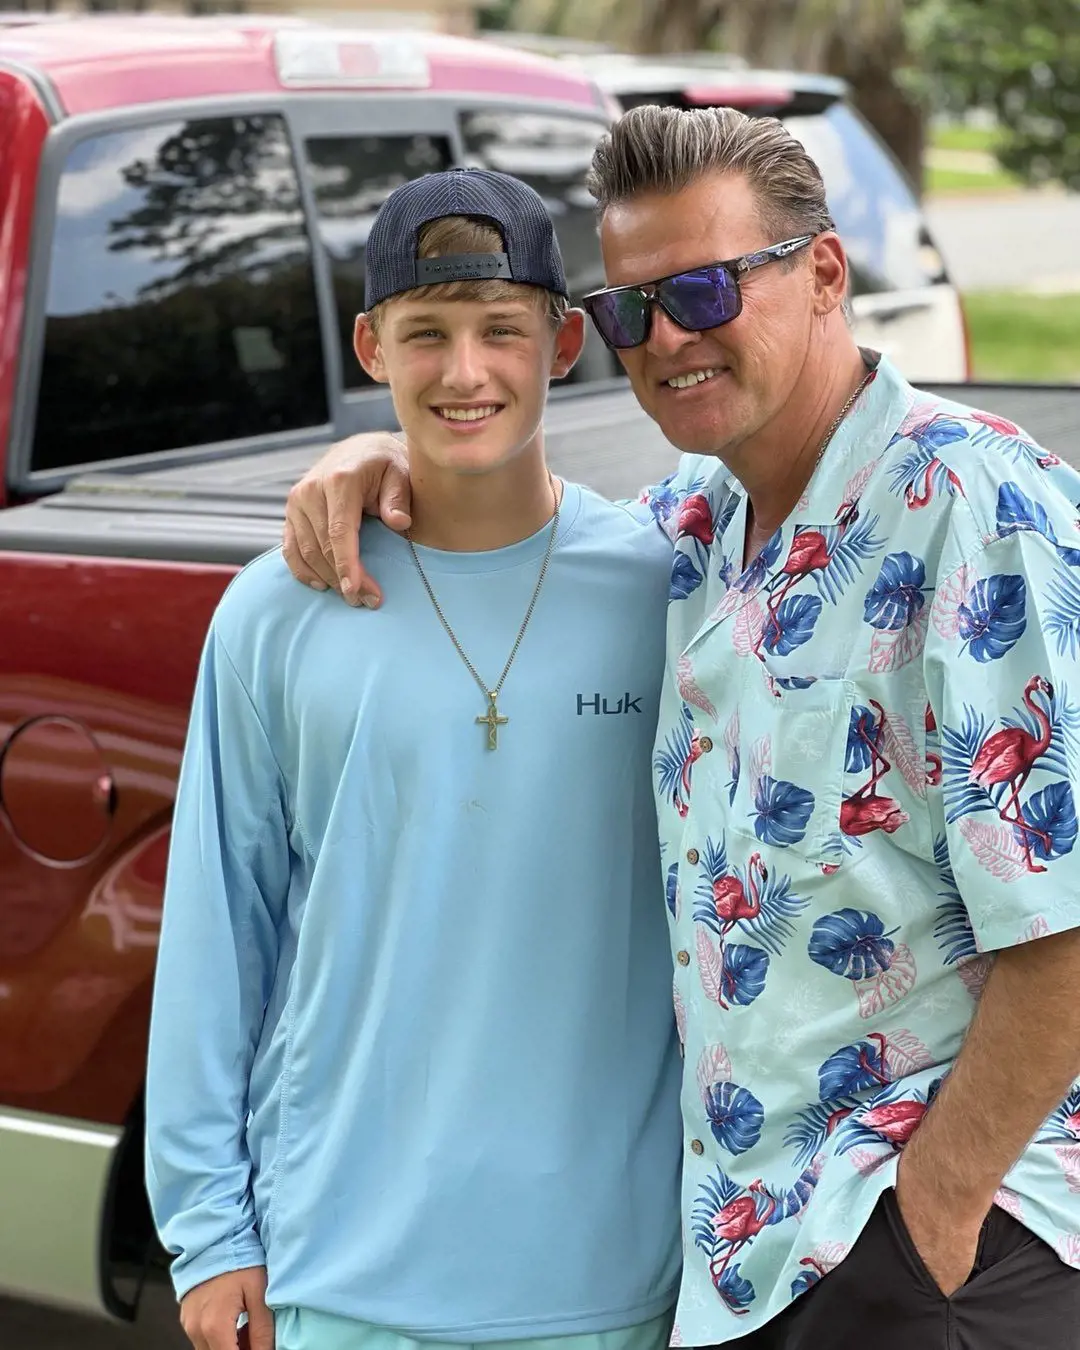 Brian with his son on the occasion of Father's day